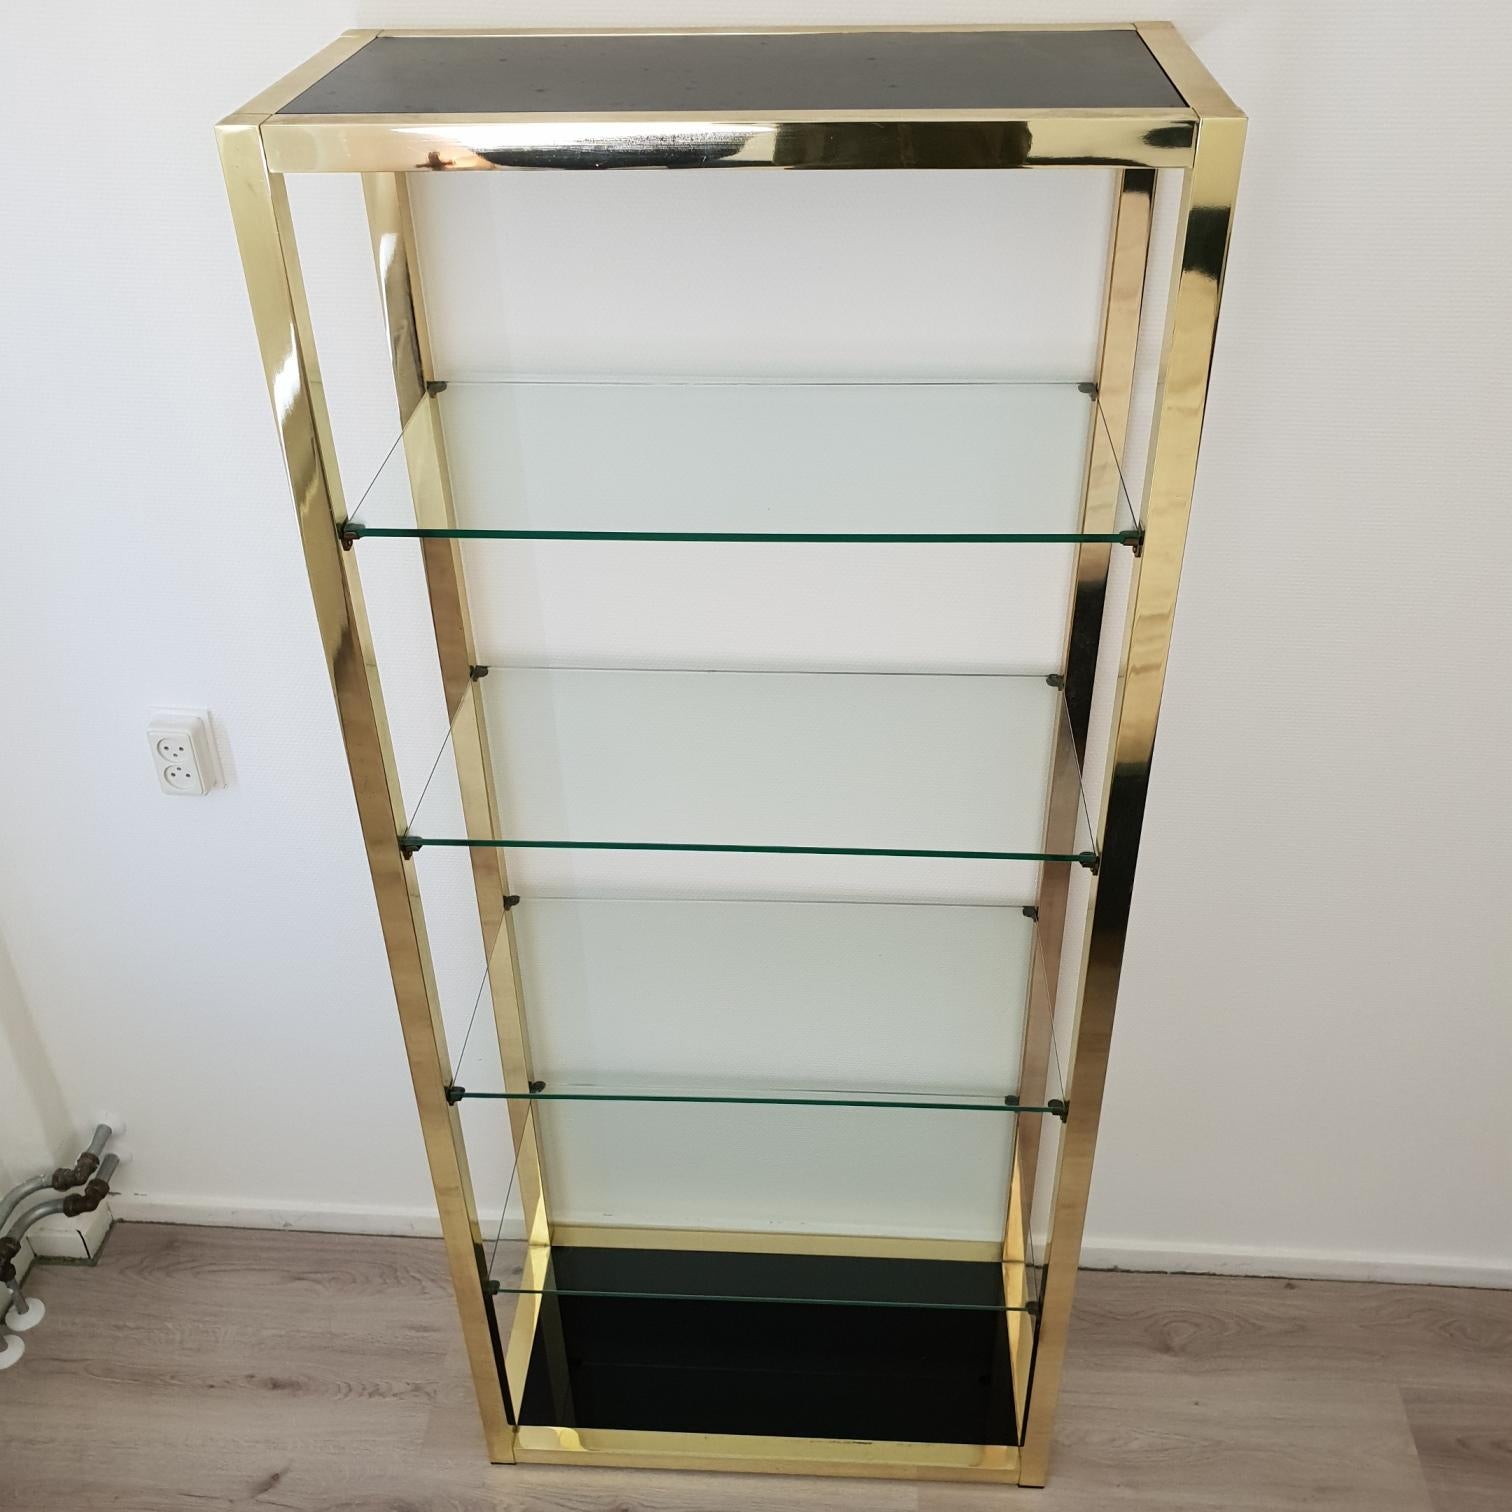 Metal Italian Mid-Century Modern Gold Plated Shelving Unit Étagère, 1970s For Sale